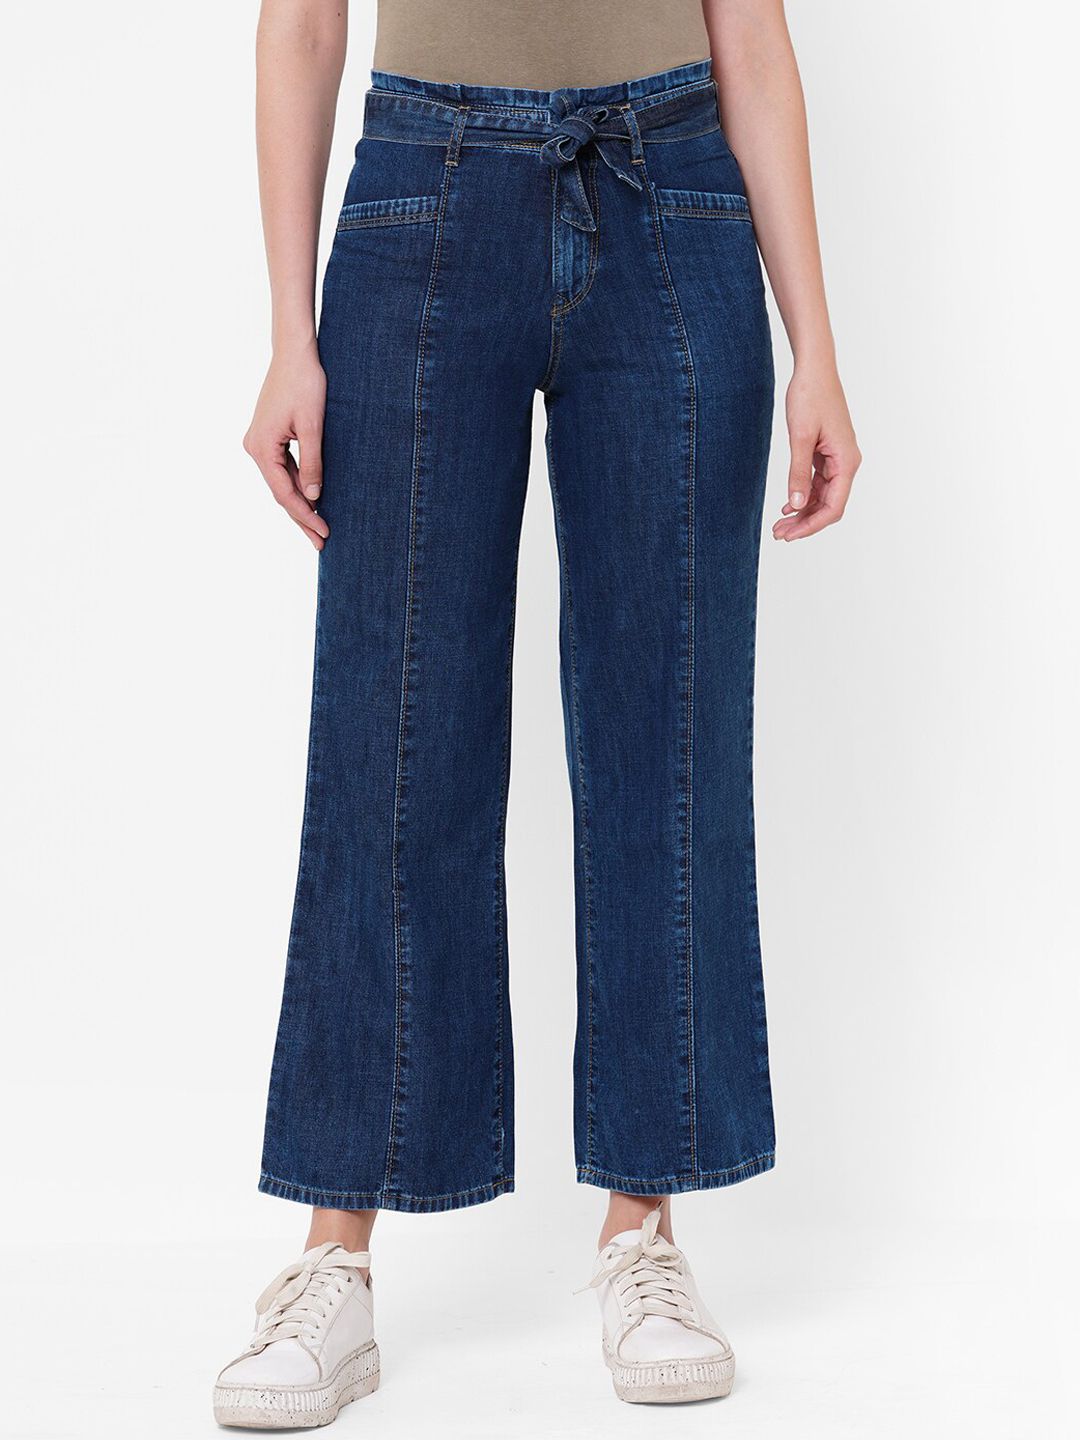 Kraus Jeans Blue Wide Leg High-Rise Cotton Jeans Price in India